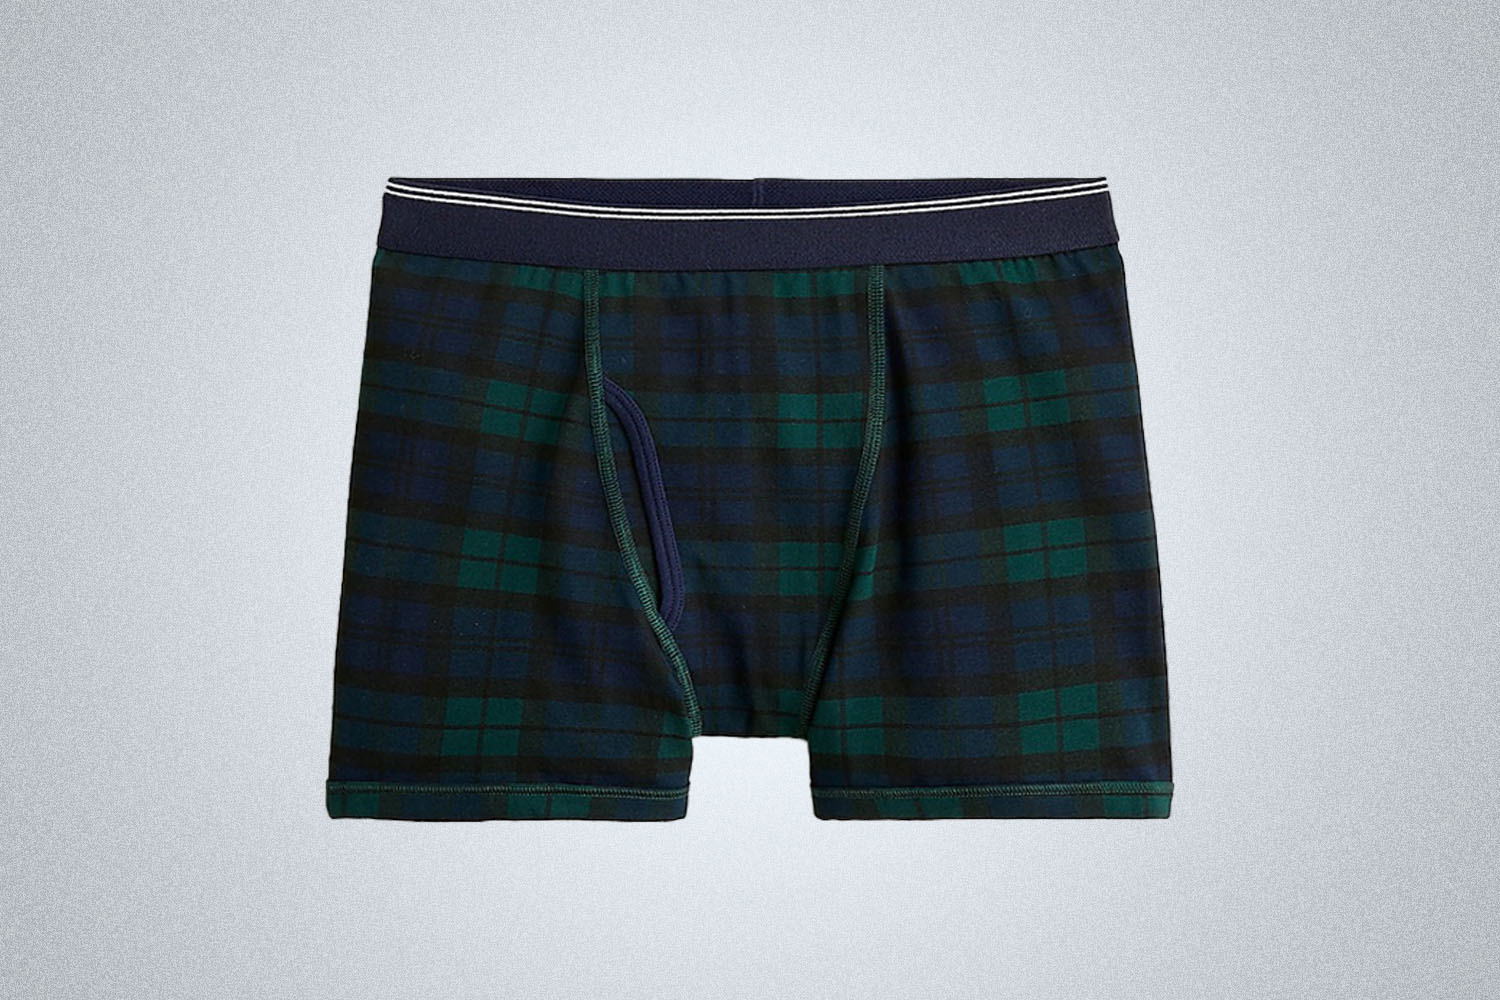 a tartan striped printed boxer brief from J.Crew on a grey background